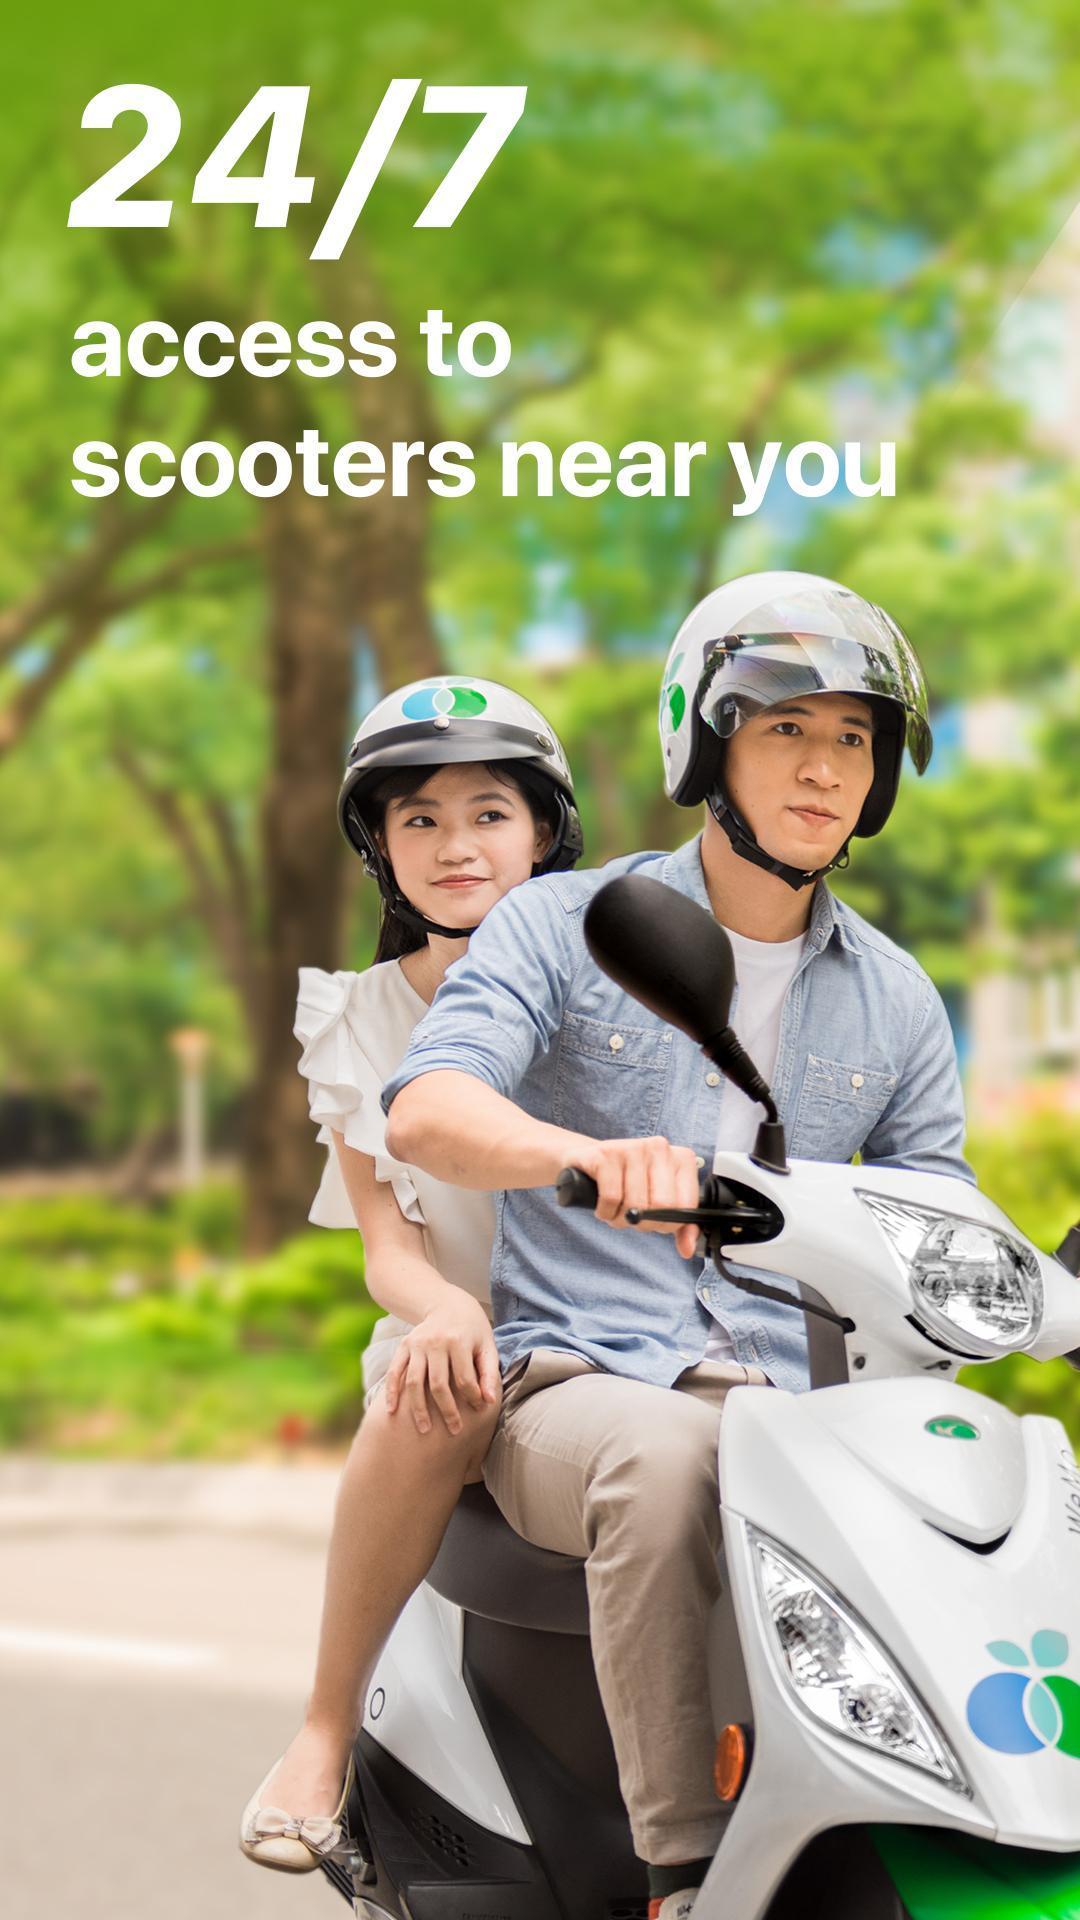 Taiwanese scooter-sharing startup WeMo secures series A funding